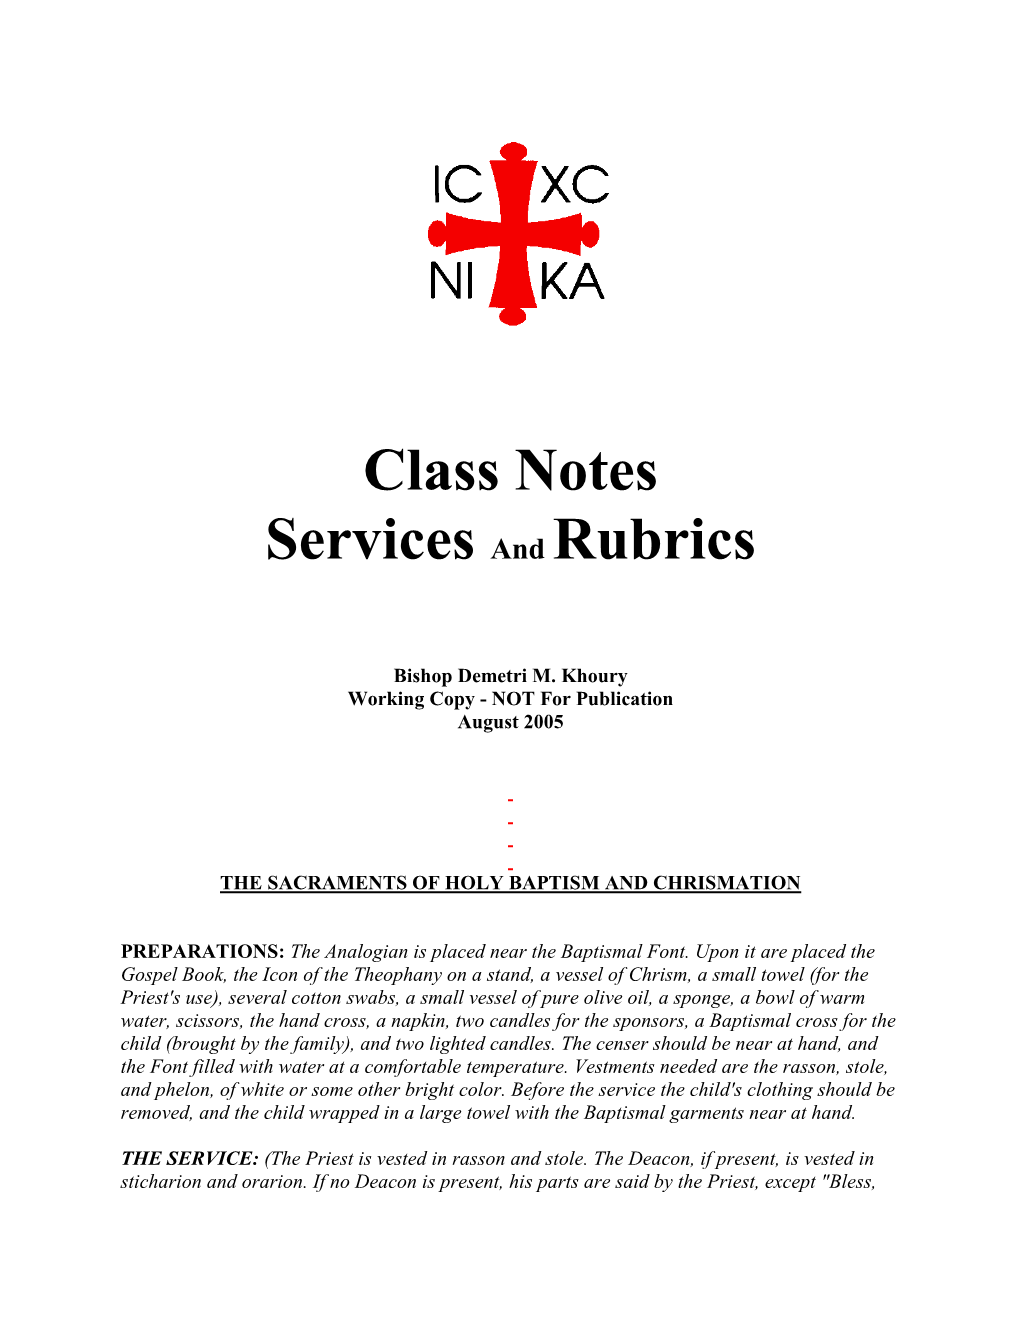 Class Notes Services and Rubrics